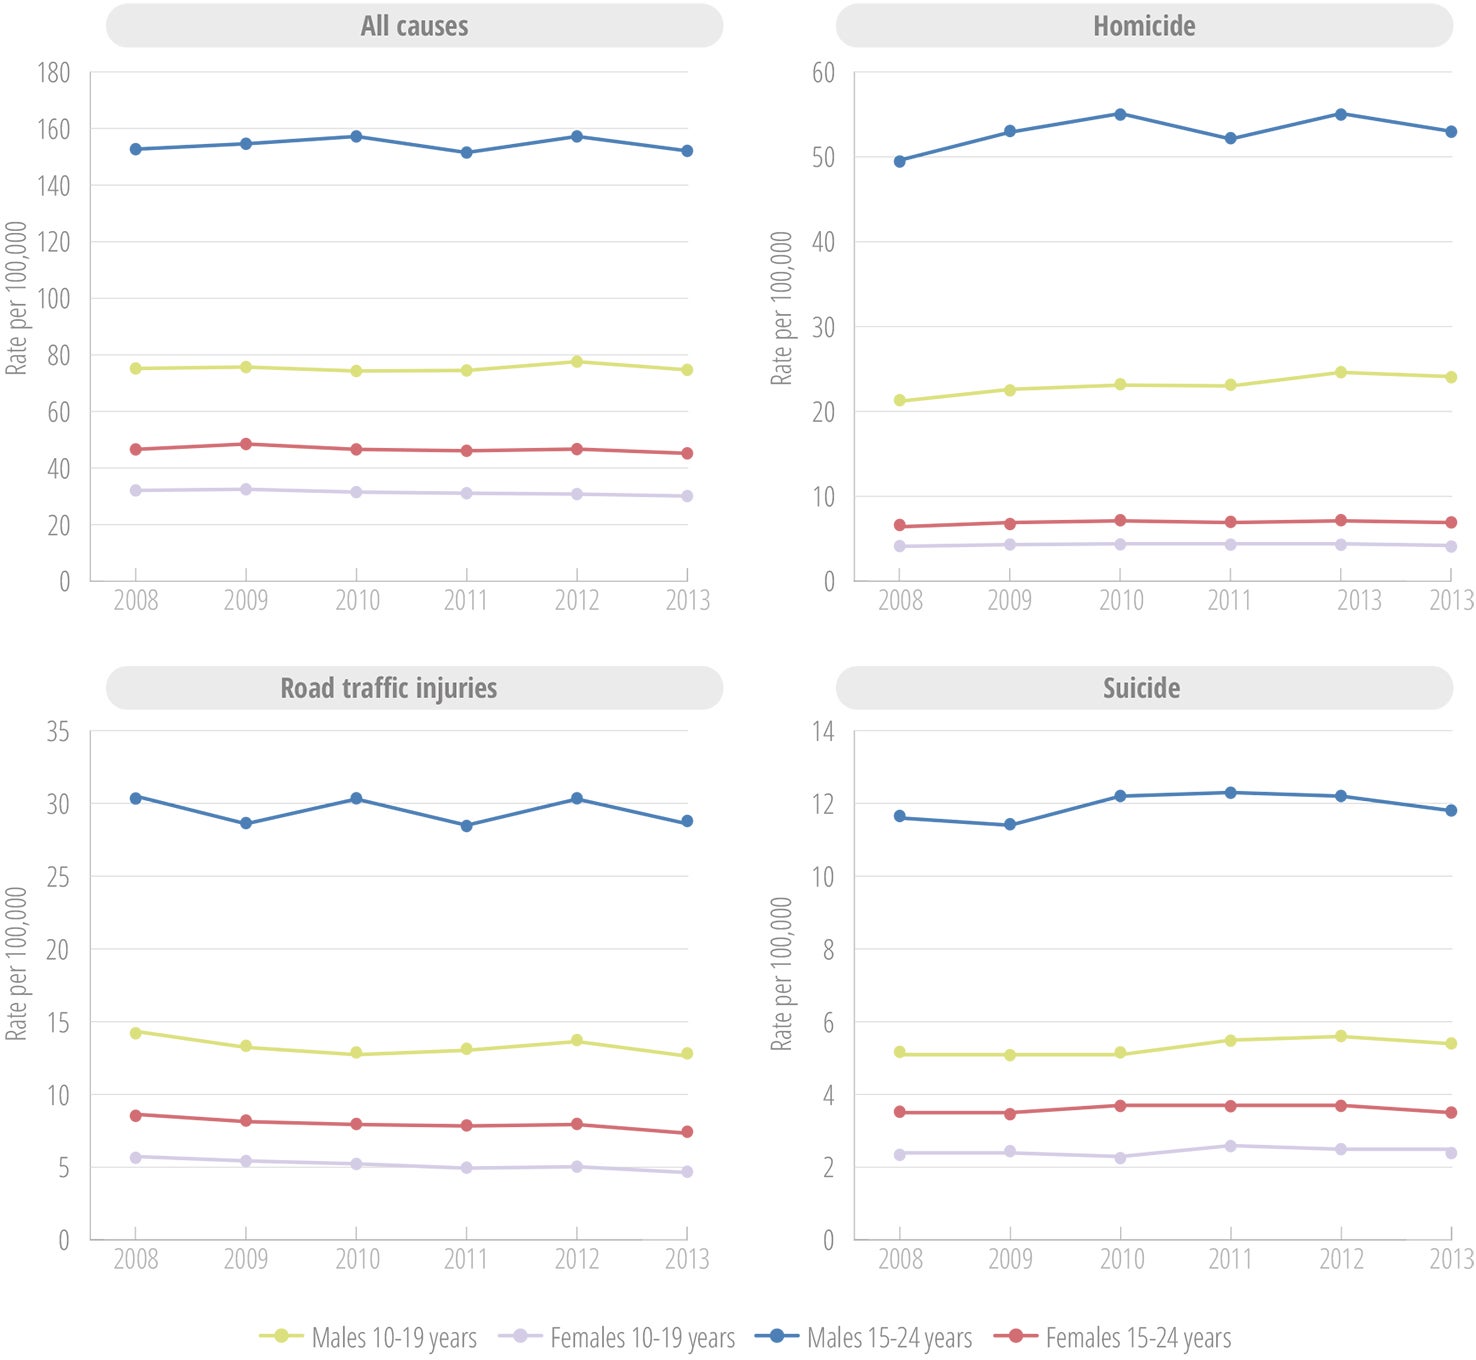 Trends in age-adjusted mortality rates in the Americas for young persons aged 10-24 years, for all causes, for homicide, for road traffic injuries, and for suicide, by sex and age groups, 2008-2013